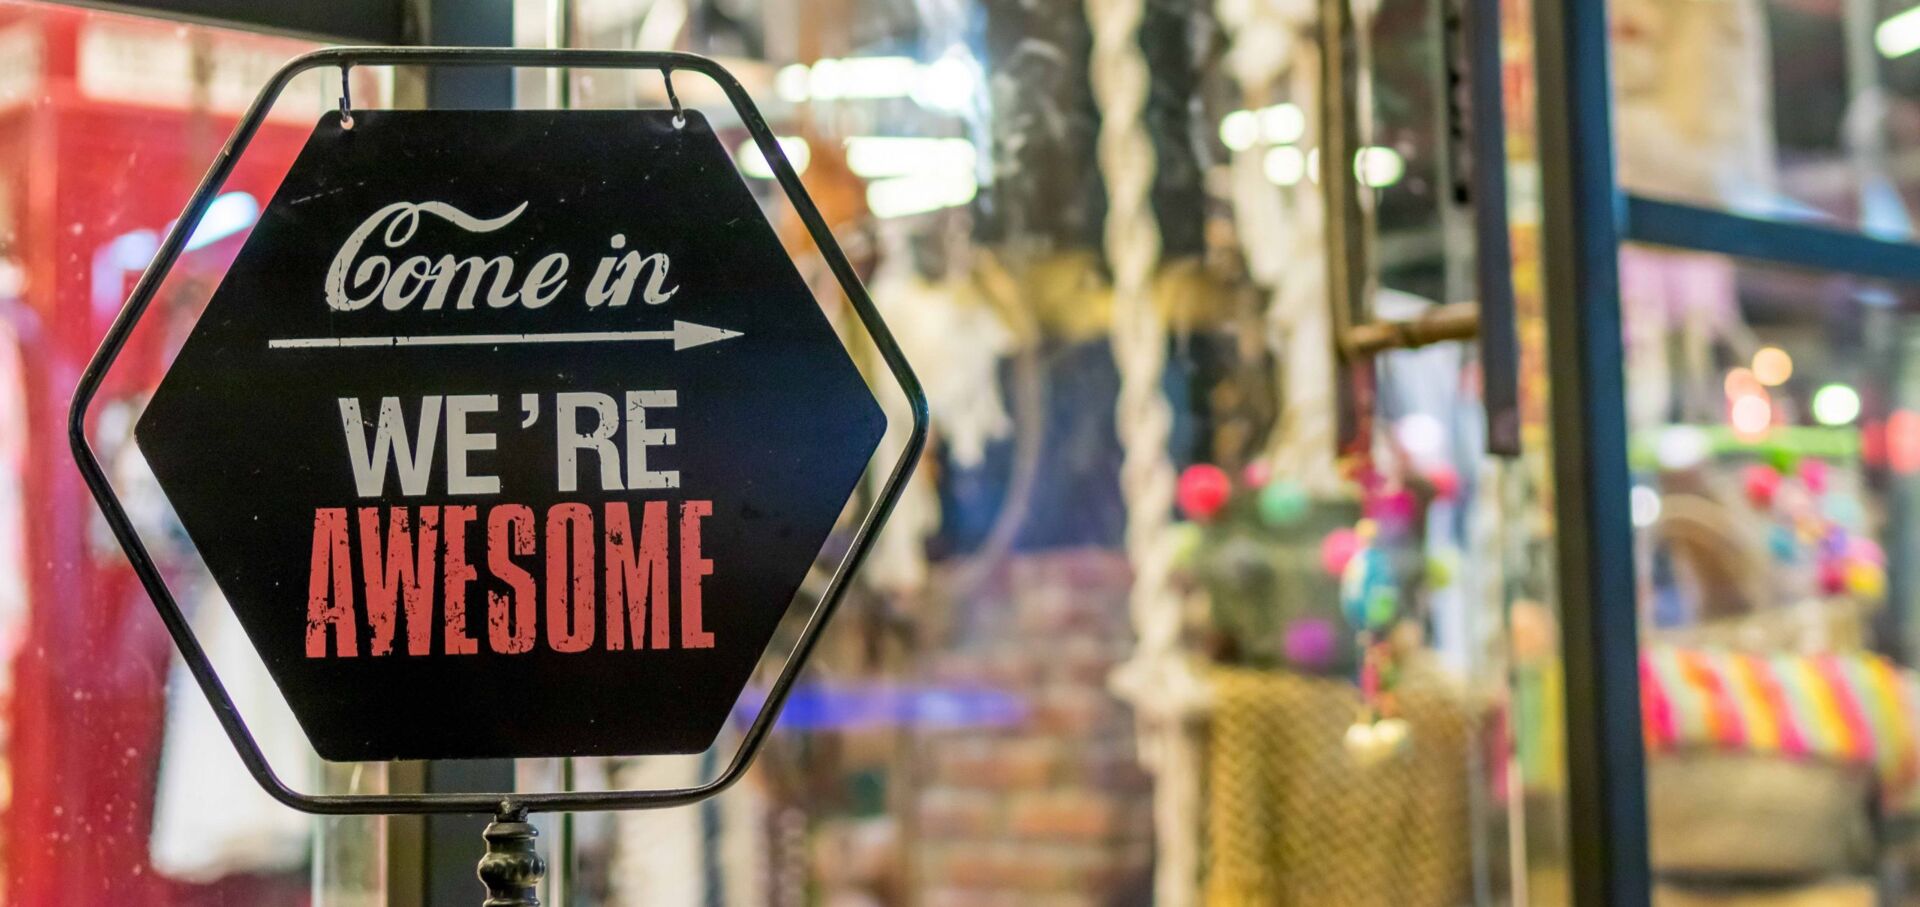 How To Promote Your Business Locally: 9 Local Marketing Ideas Proven To Work